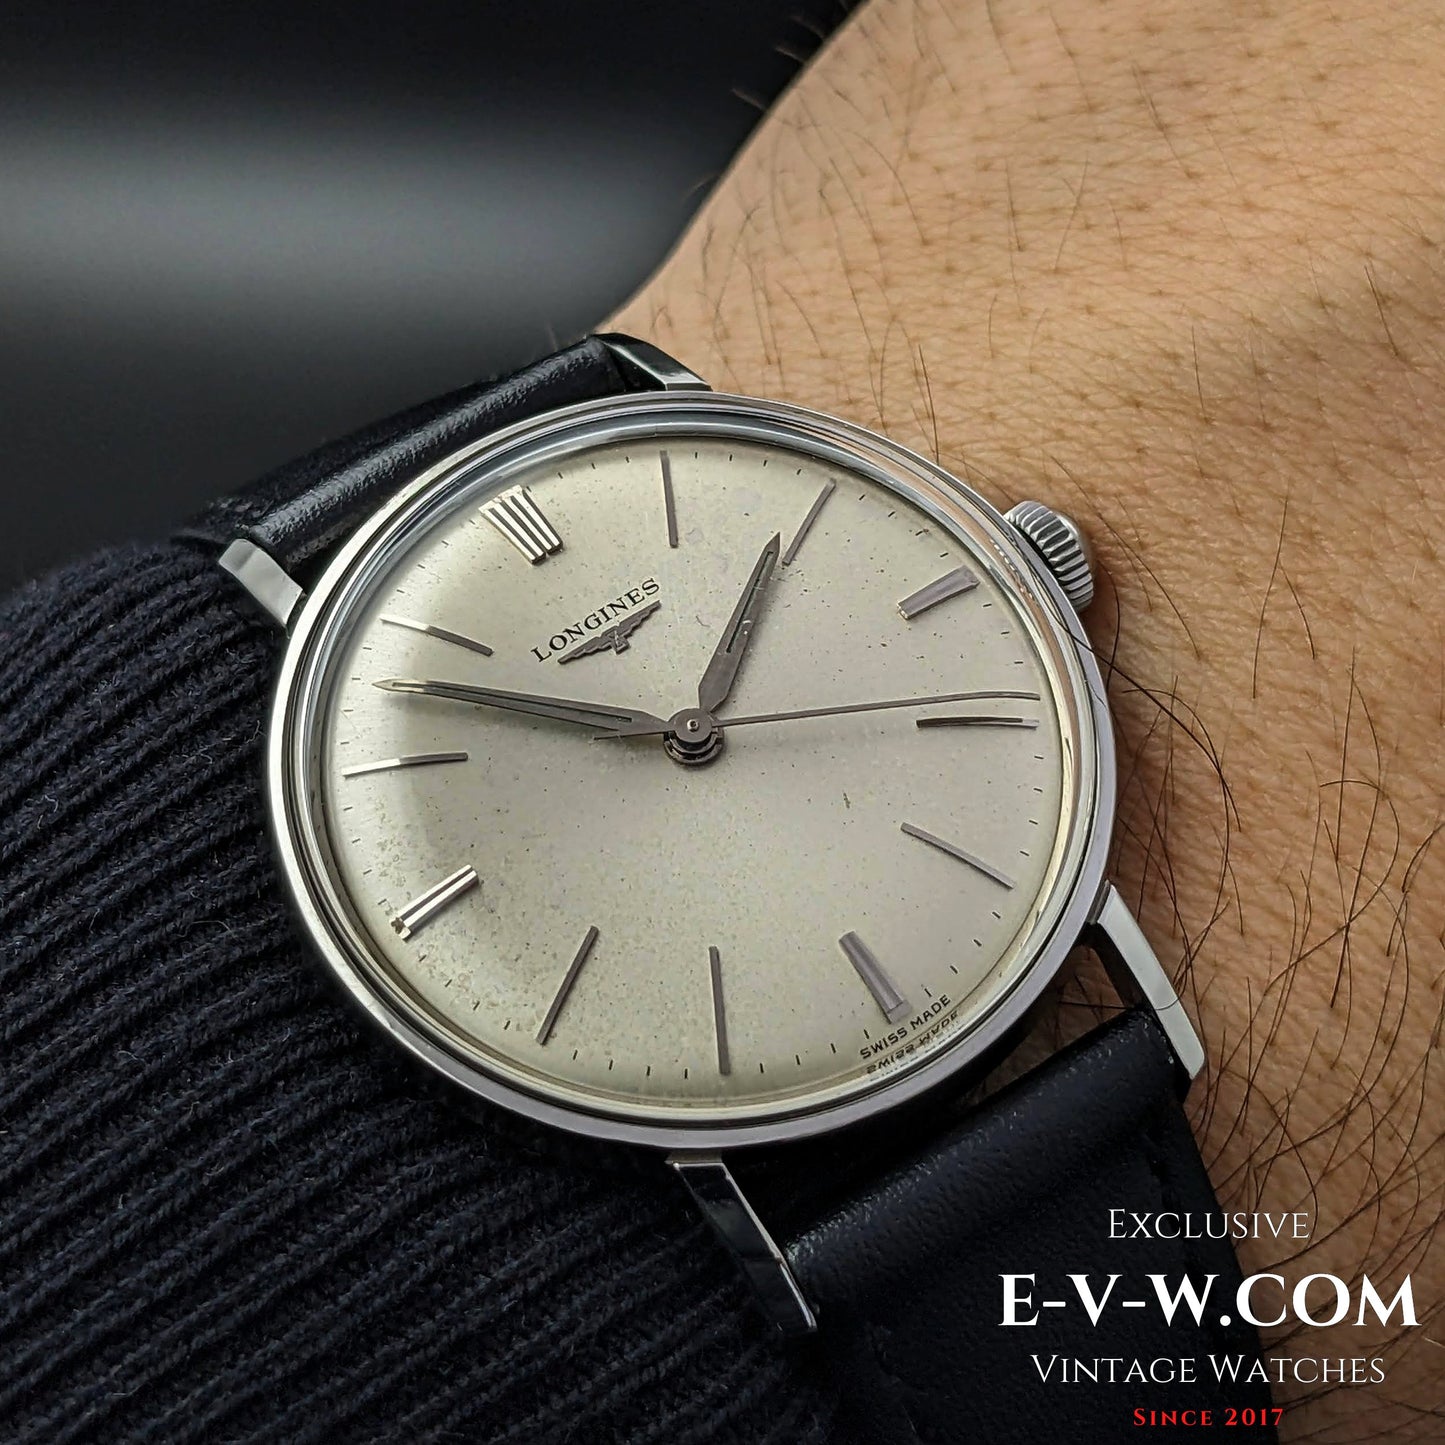 Longines Classic  /cal. 280 / ref.1759 /  Vintage 1961 / Longines Archives Extract 